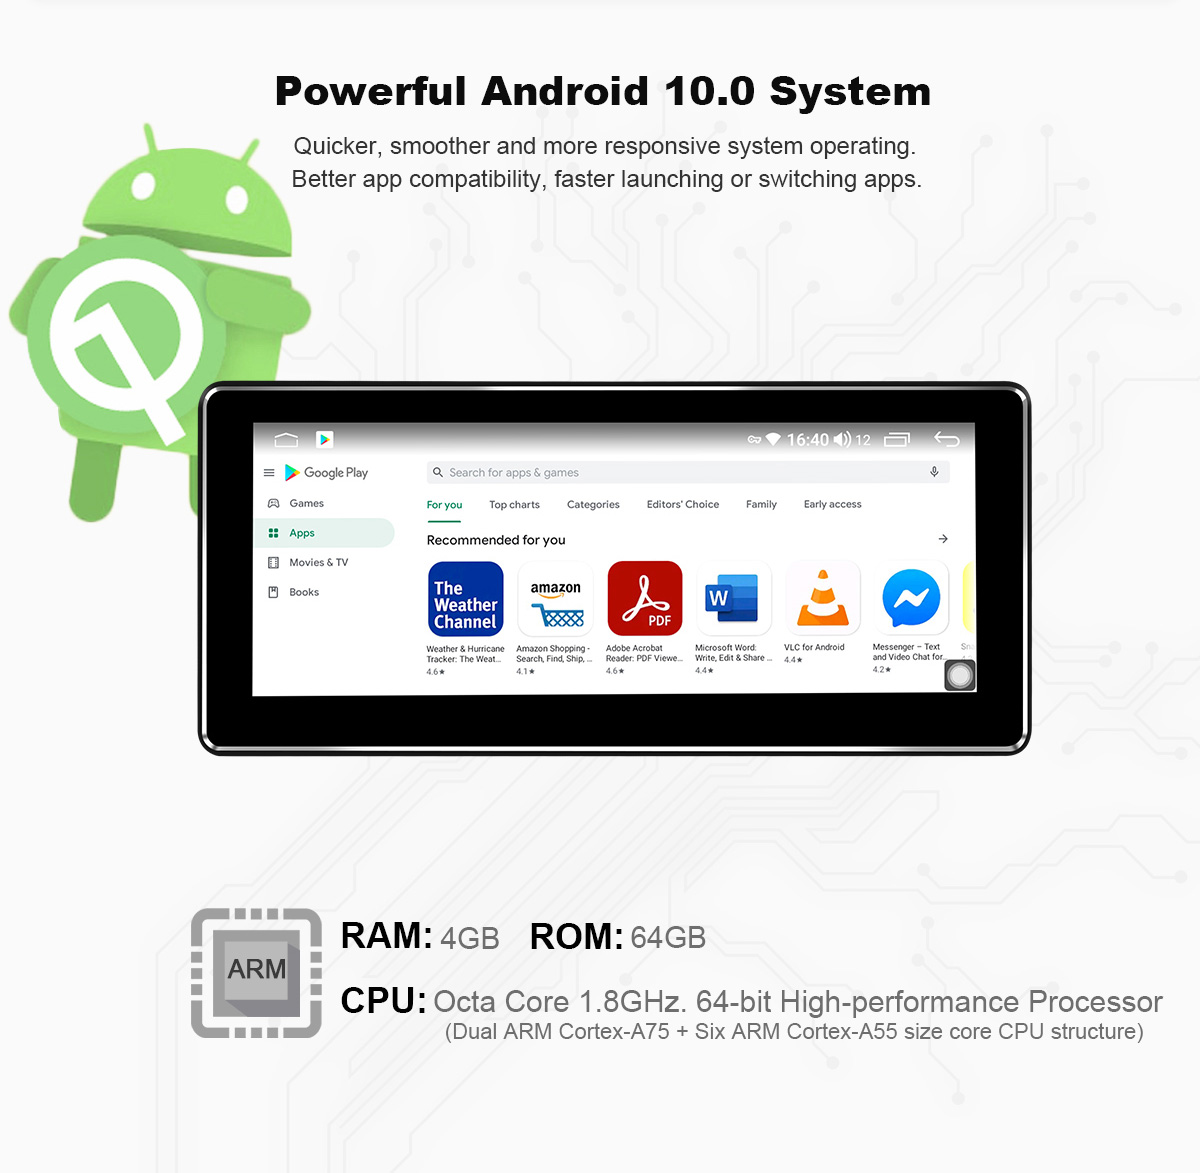 10.25 Inch 1 Din Android 10 System 